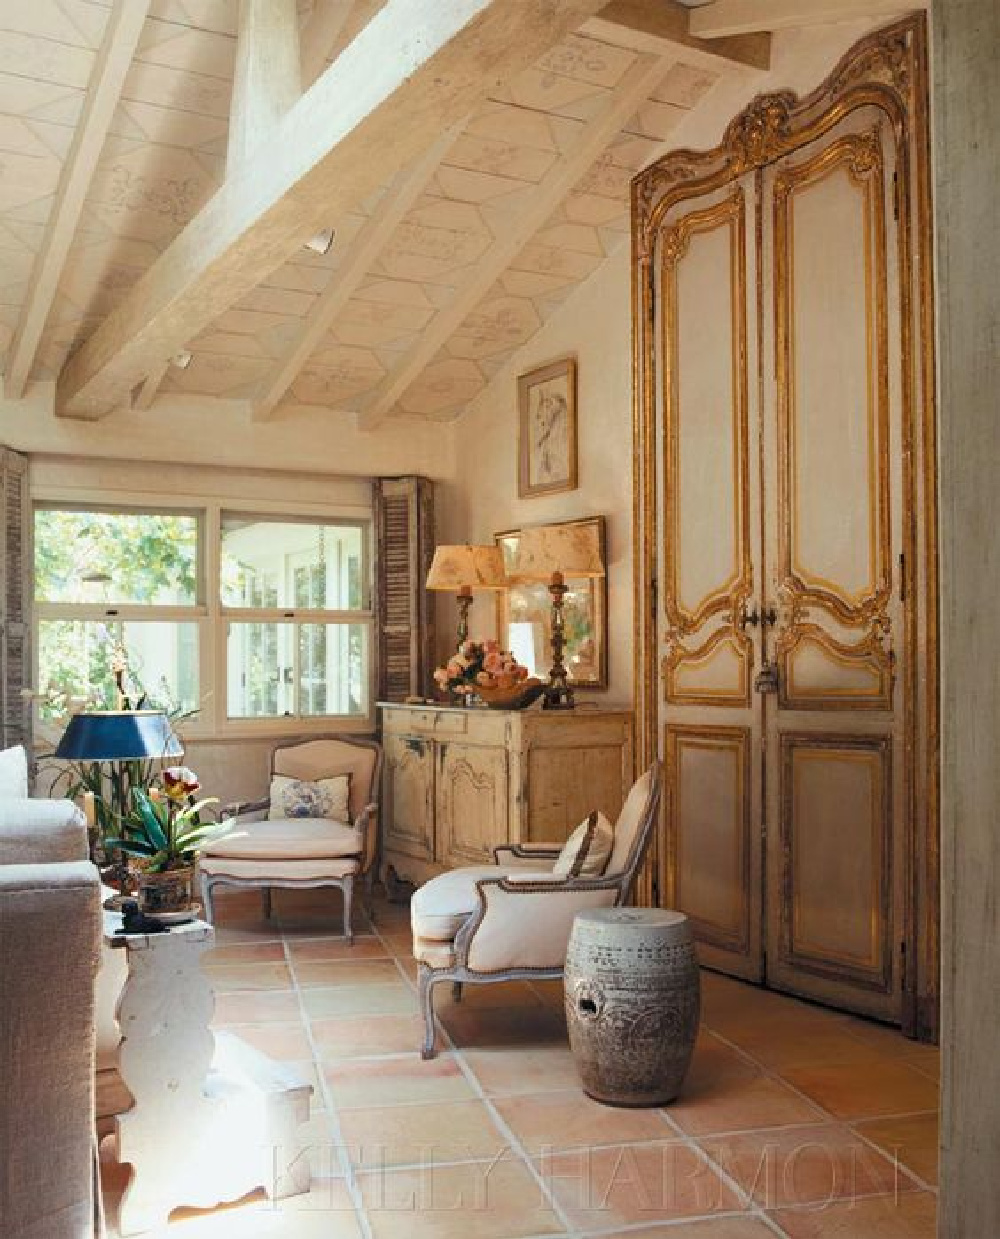 If breathtaking European farmhouse decorated rooms float your boat, come on over and soak up the inspiration from these European inspired elegant and sophisticated farmhouse style spaces. #FrenchCountry #elegantdecor #antiques